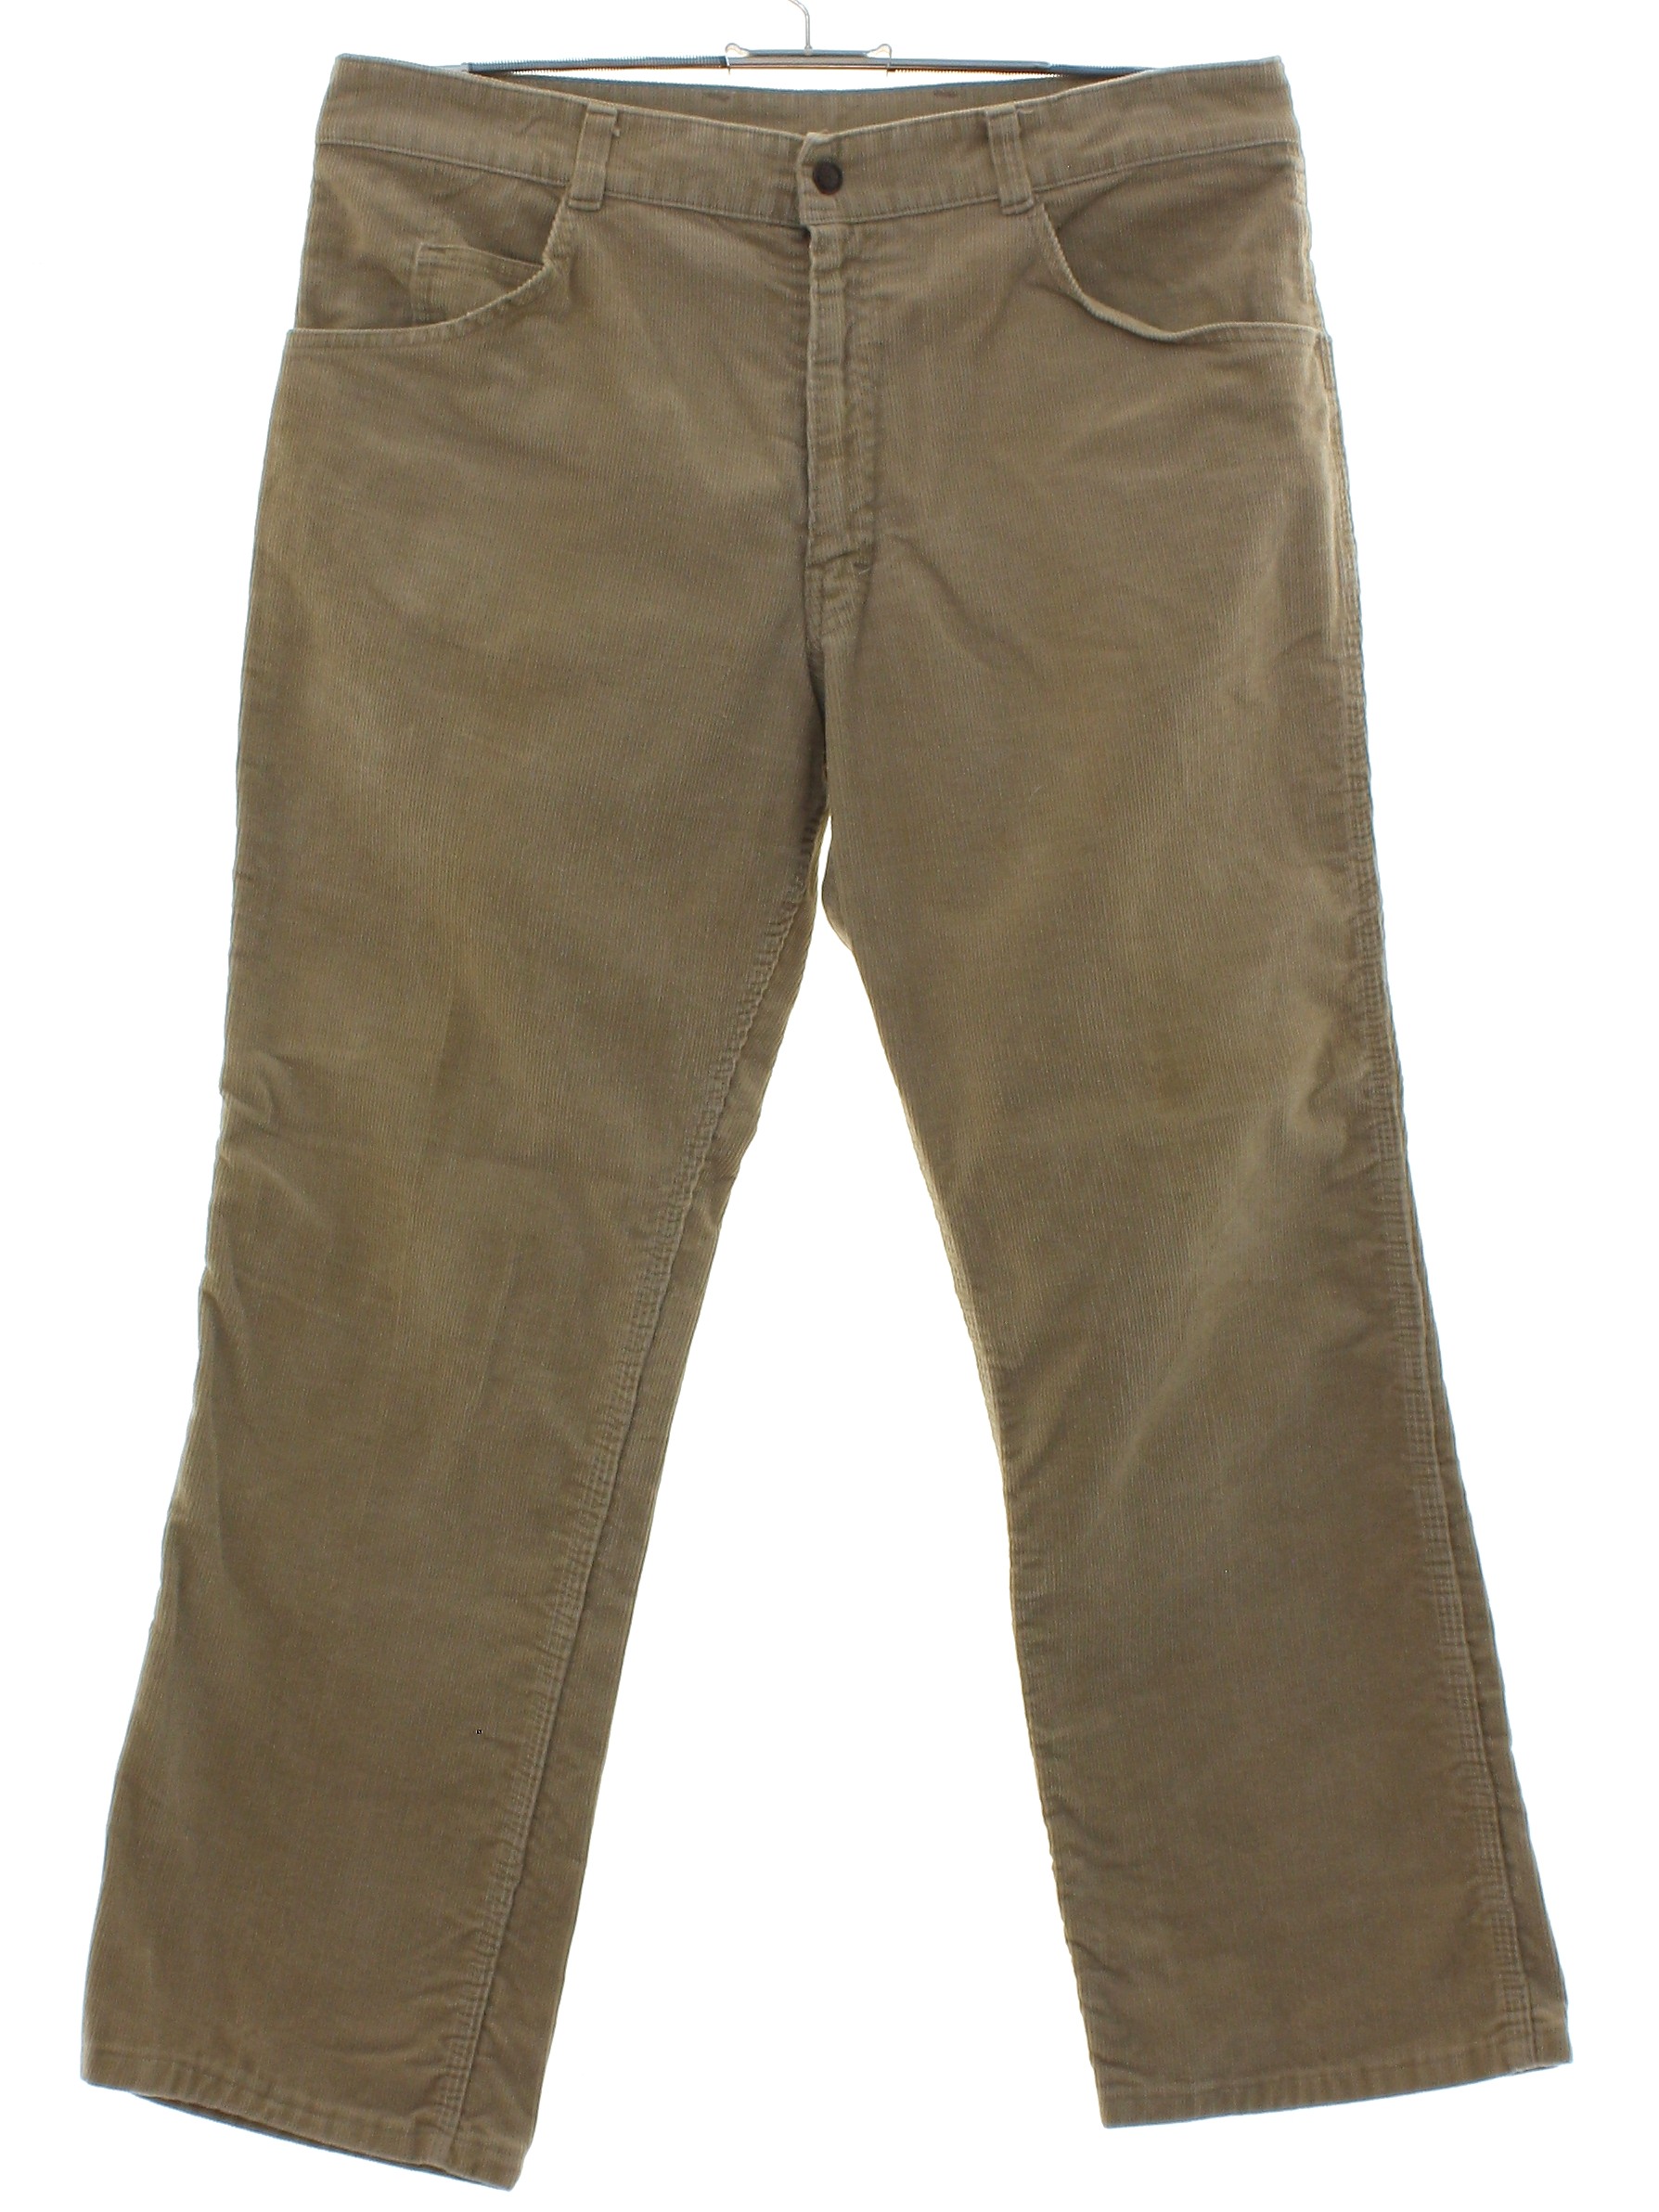 Vintage 80s Flared Pants / Flares: Early 80s -Aqueduct- Mens beige ...